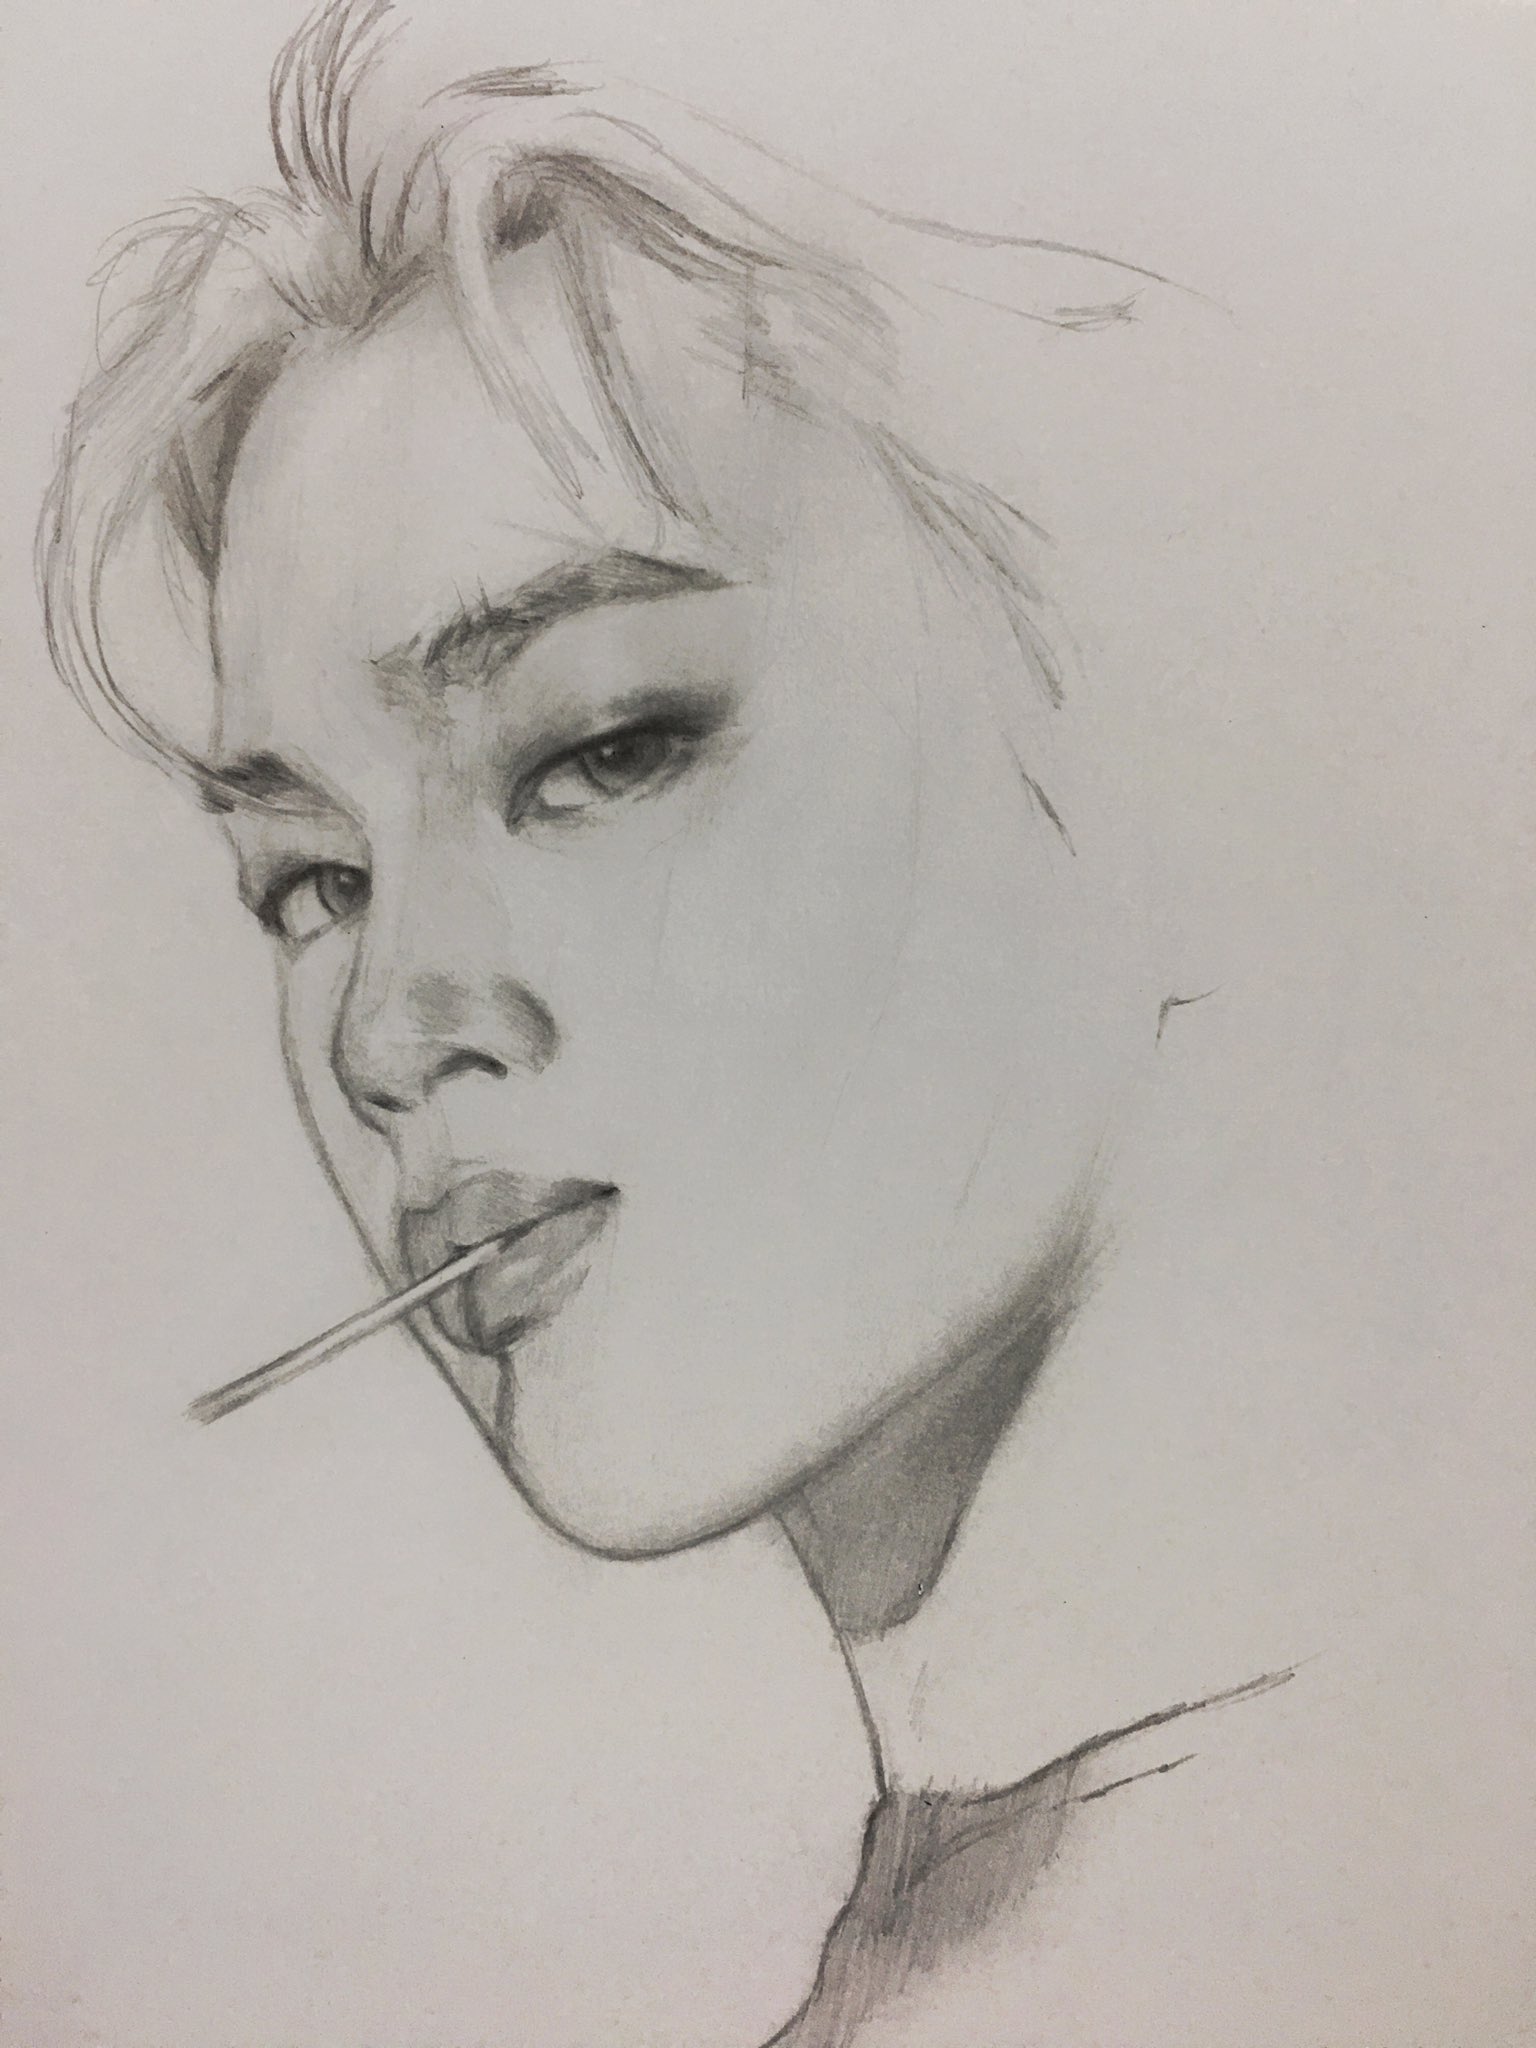 Creative Jimin Sketch Drawings with simple drawing